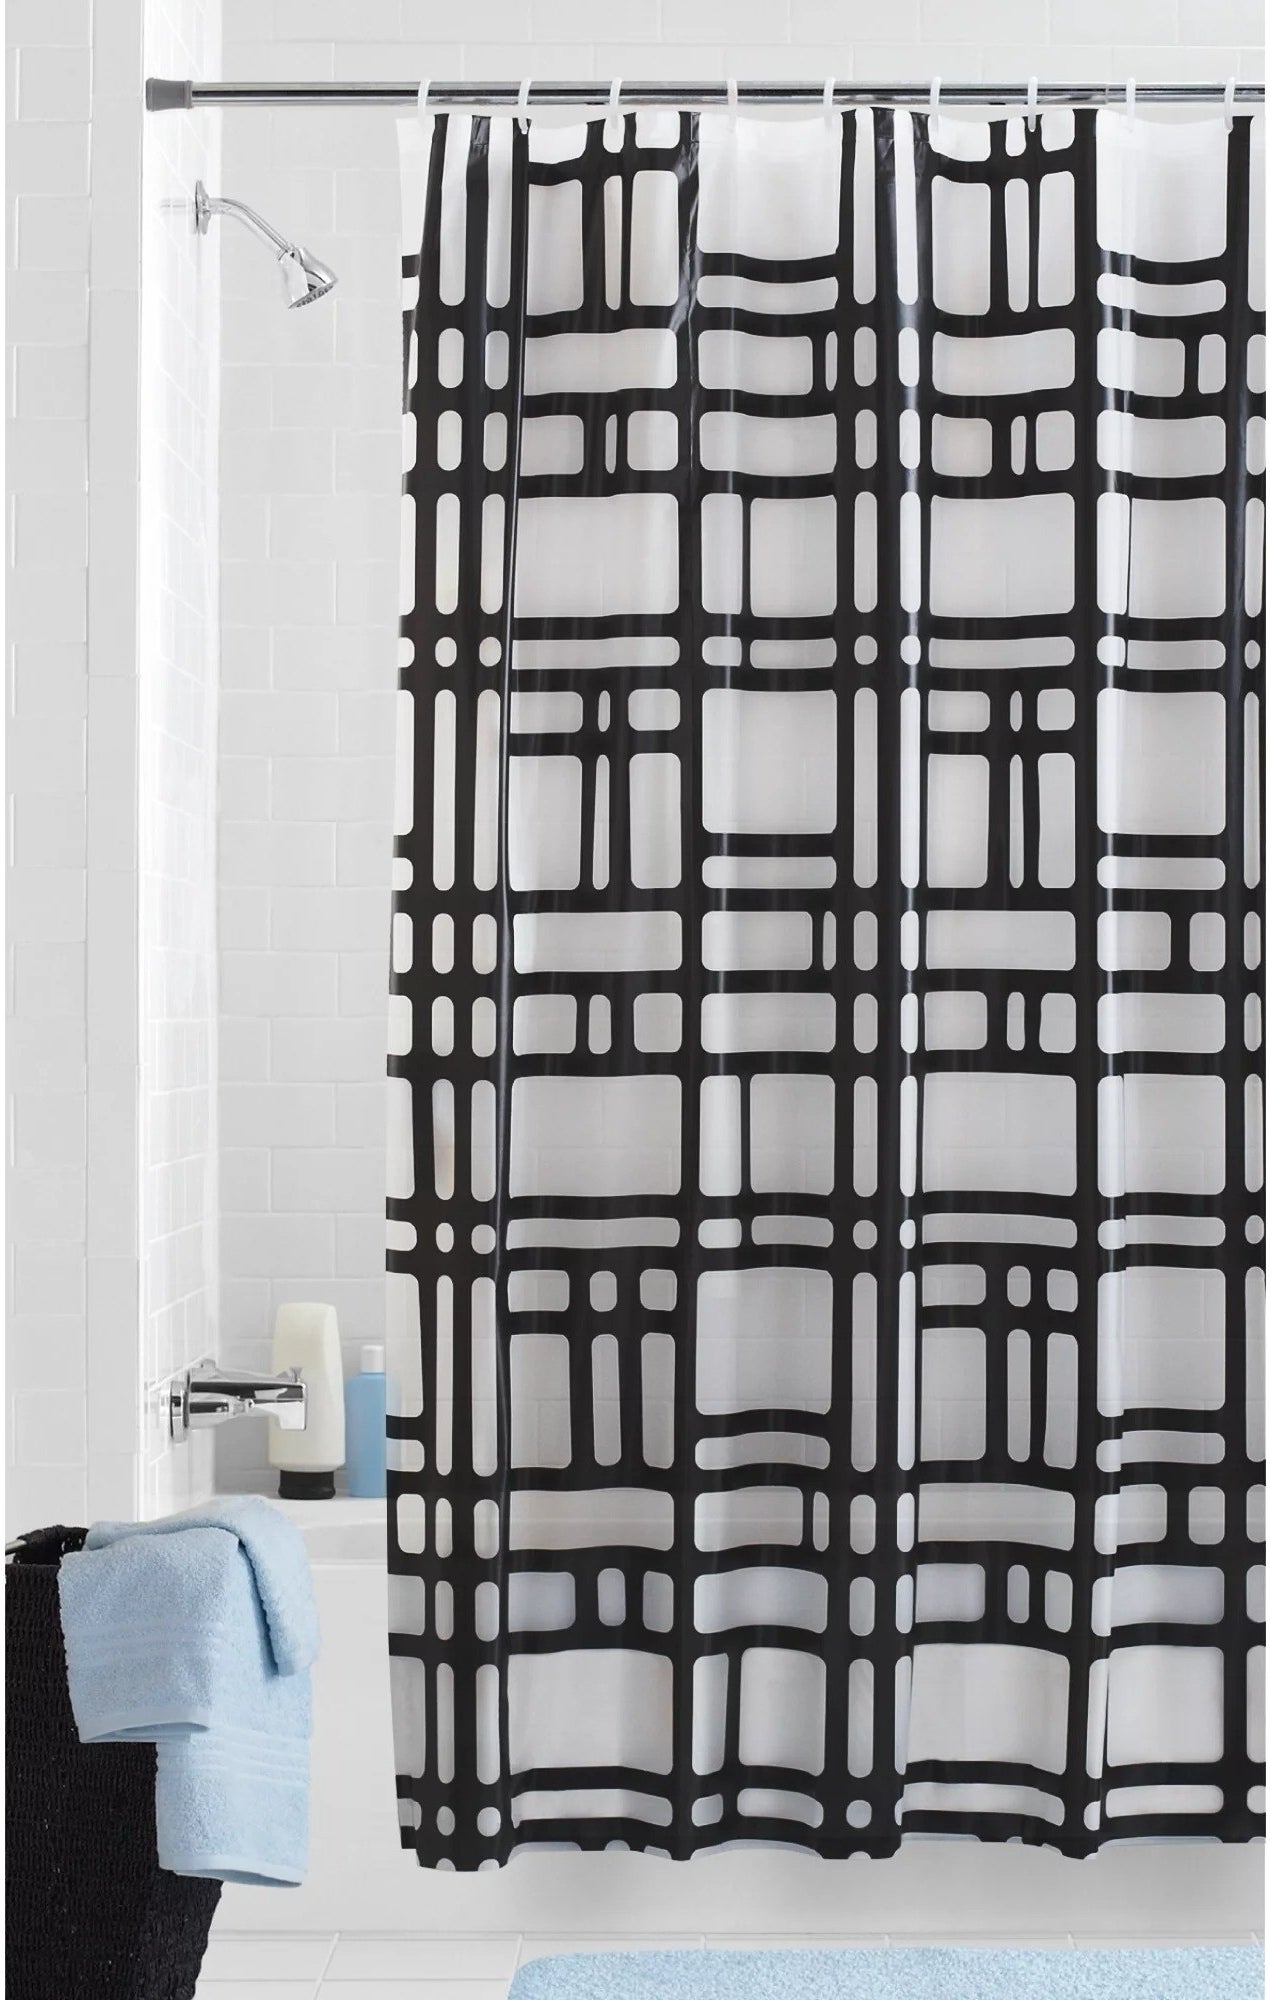 Frosted shower curtain with black geometric deserve